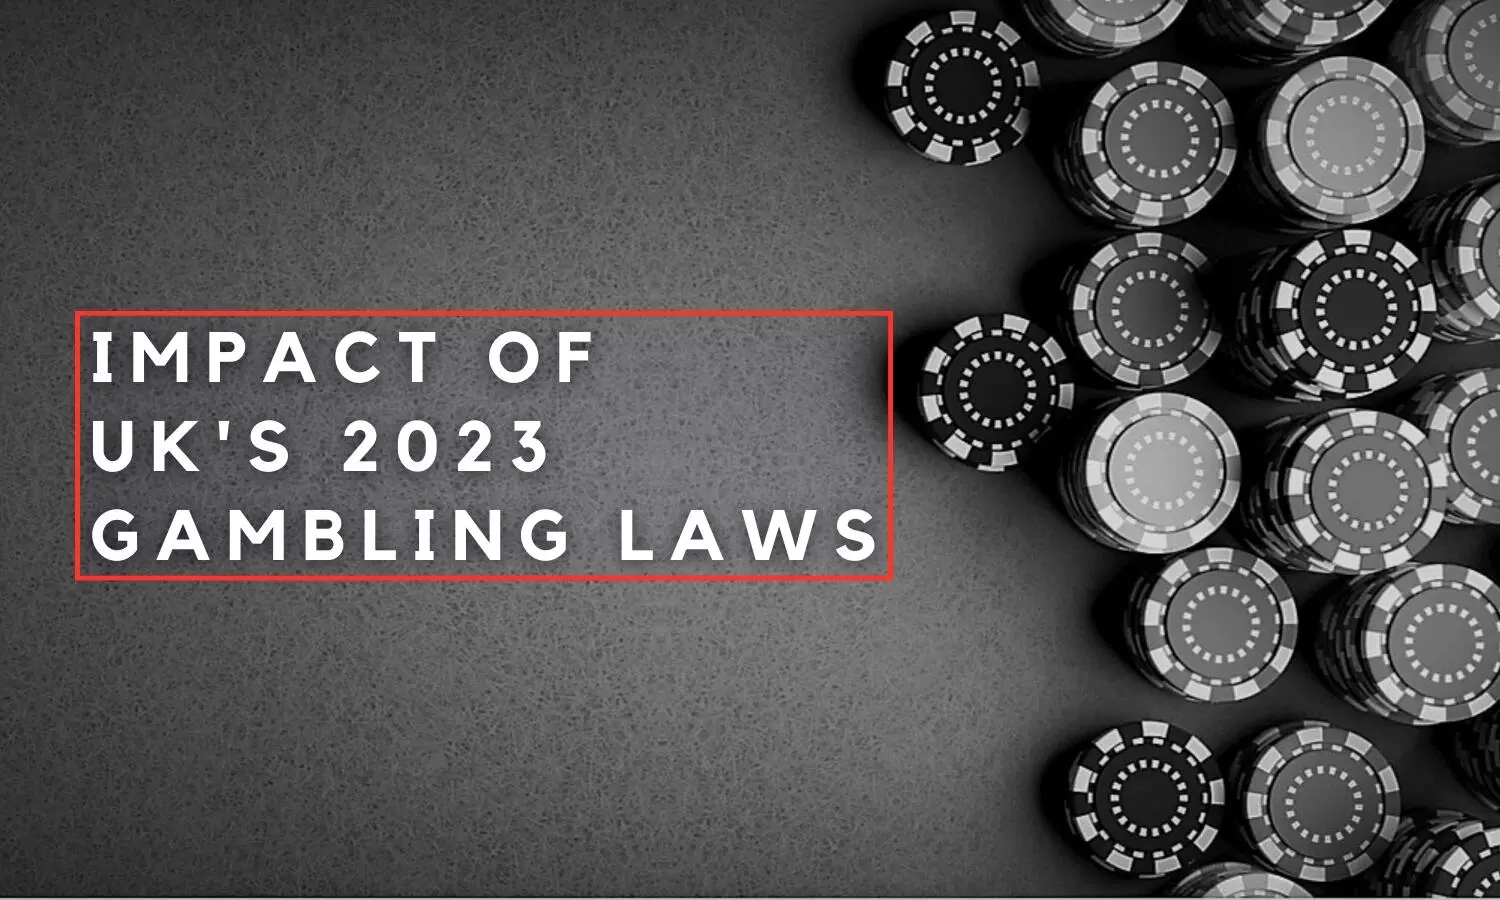 The Impact of UKs 2023 Gambling Laws: Effects on Players and Providers